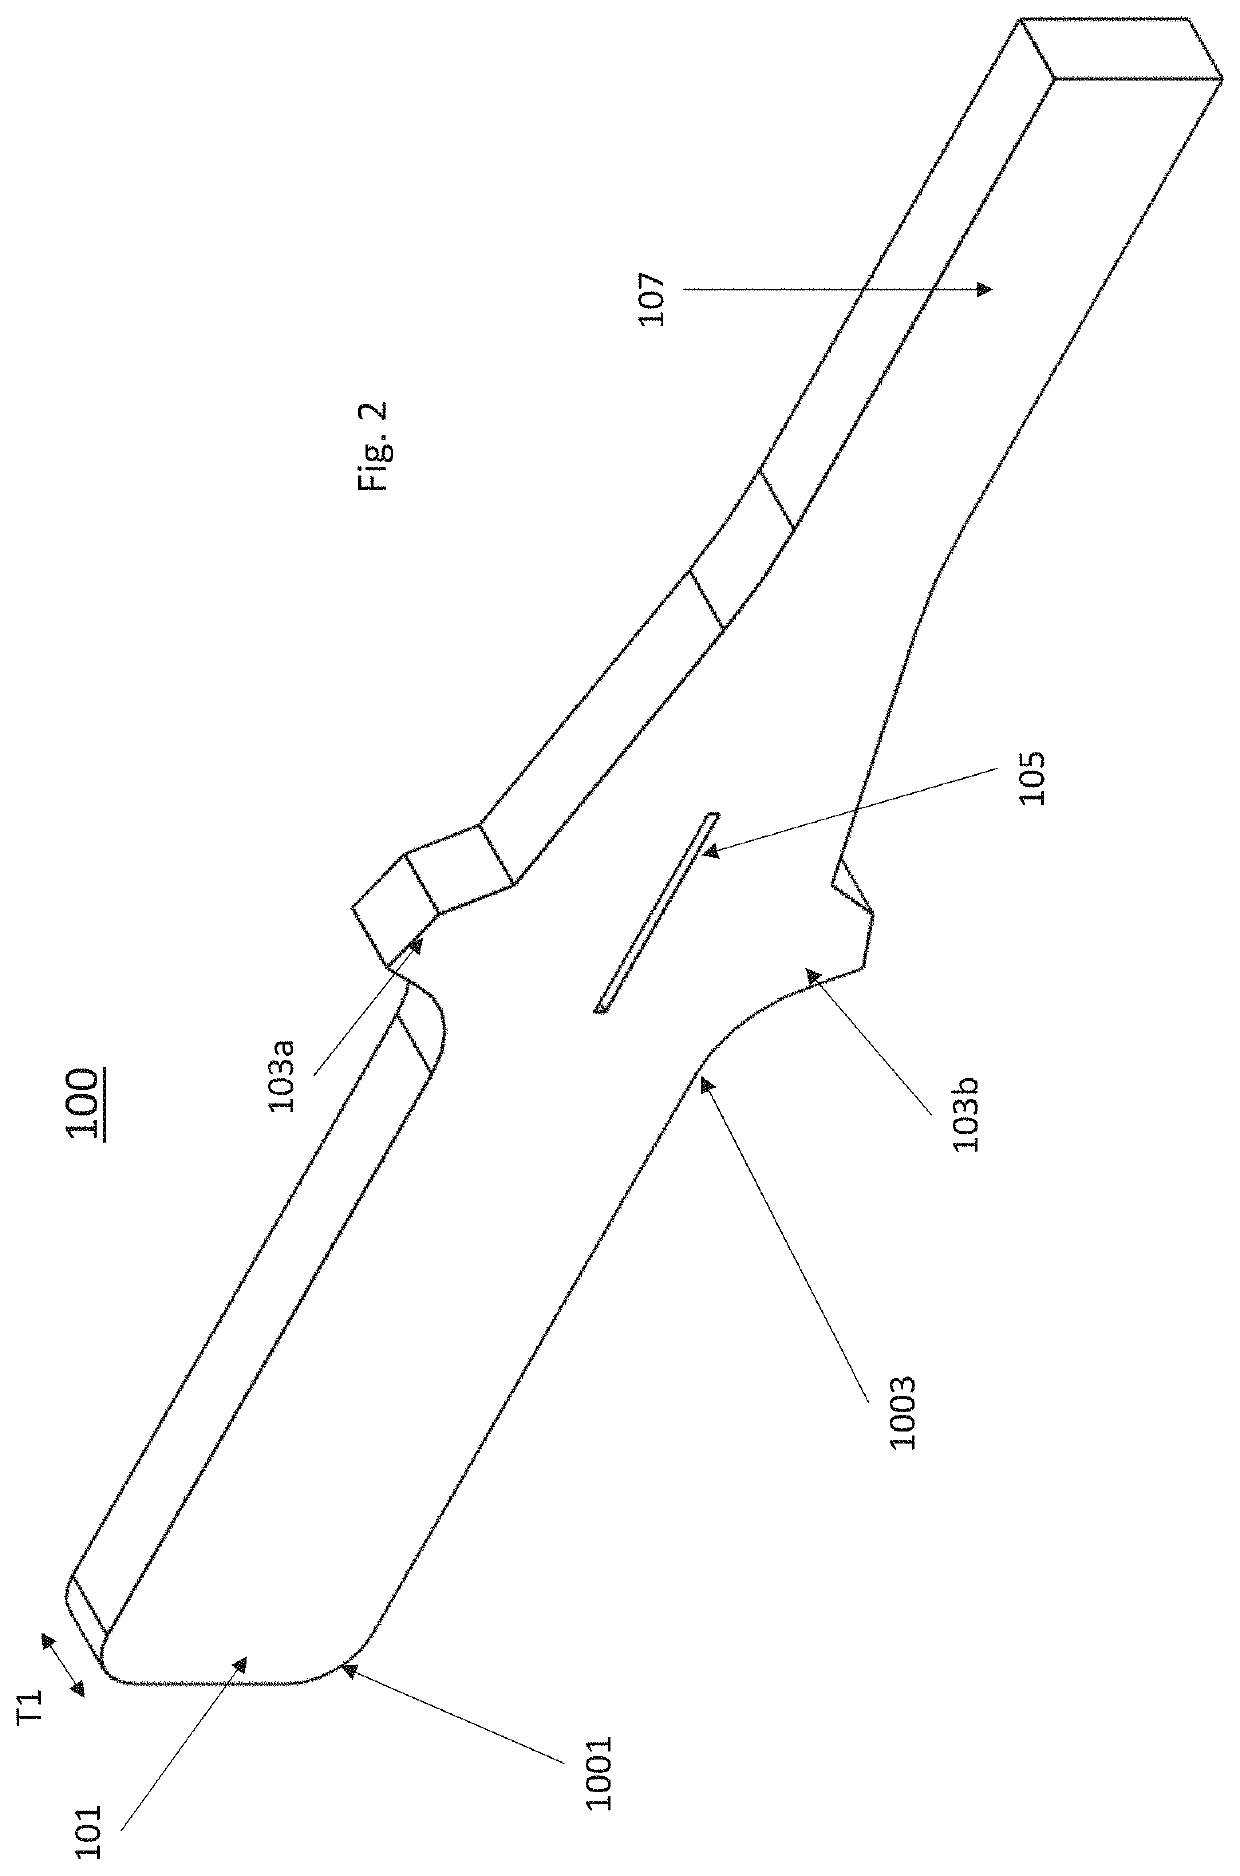 Direct sample collection pad and method of use for assay diagnosis